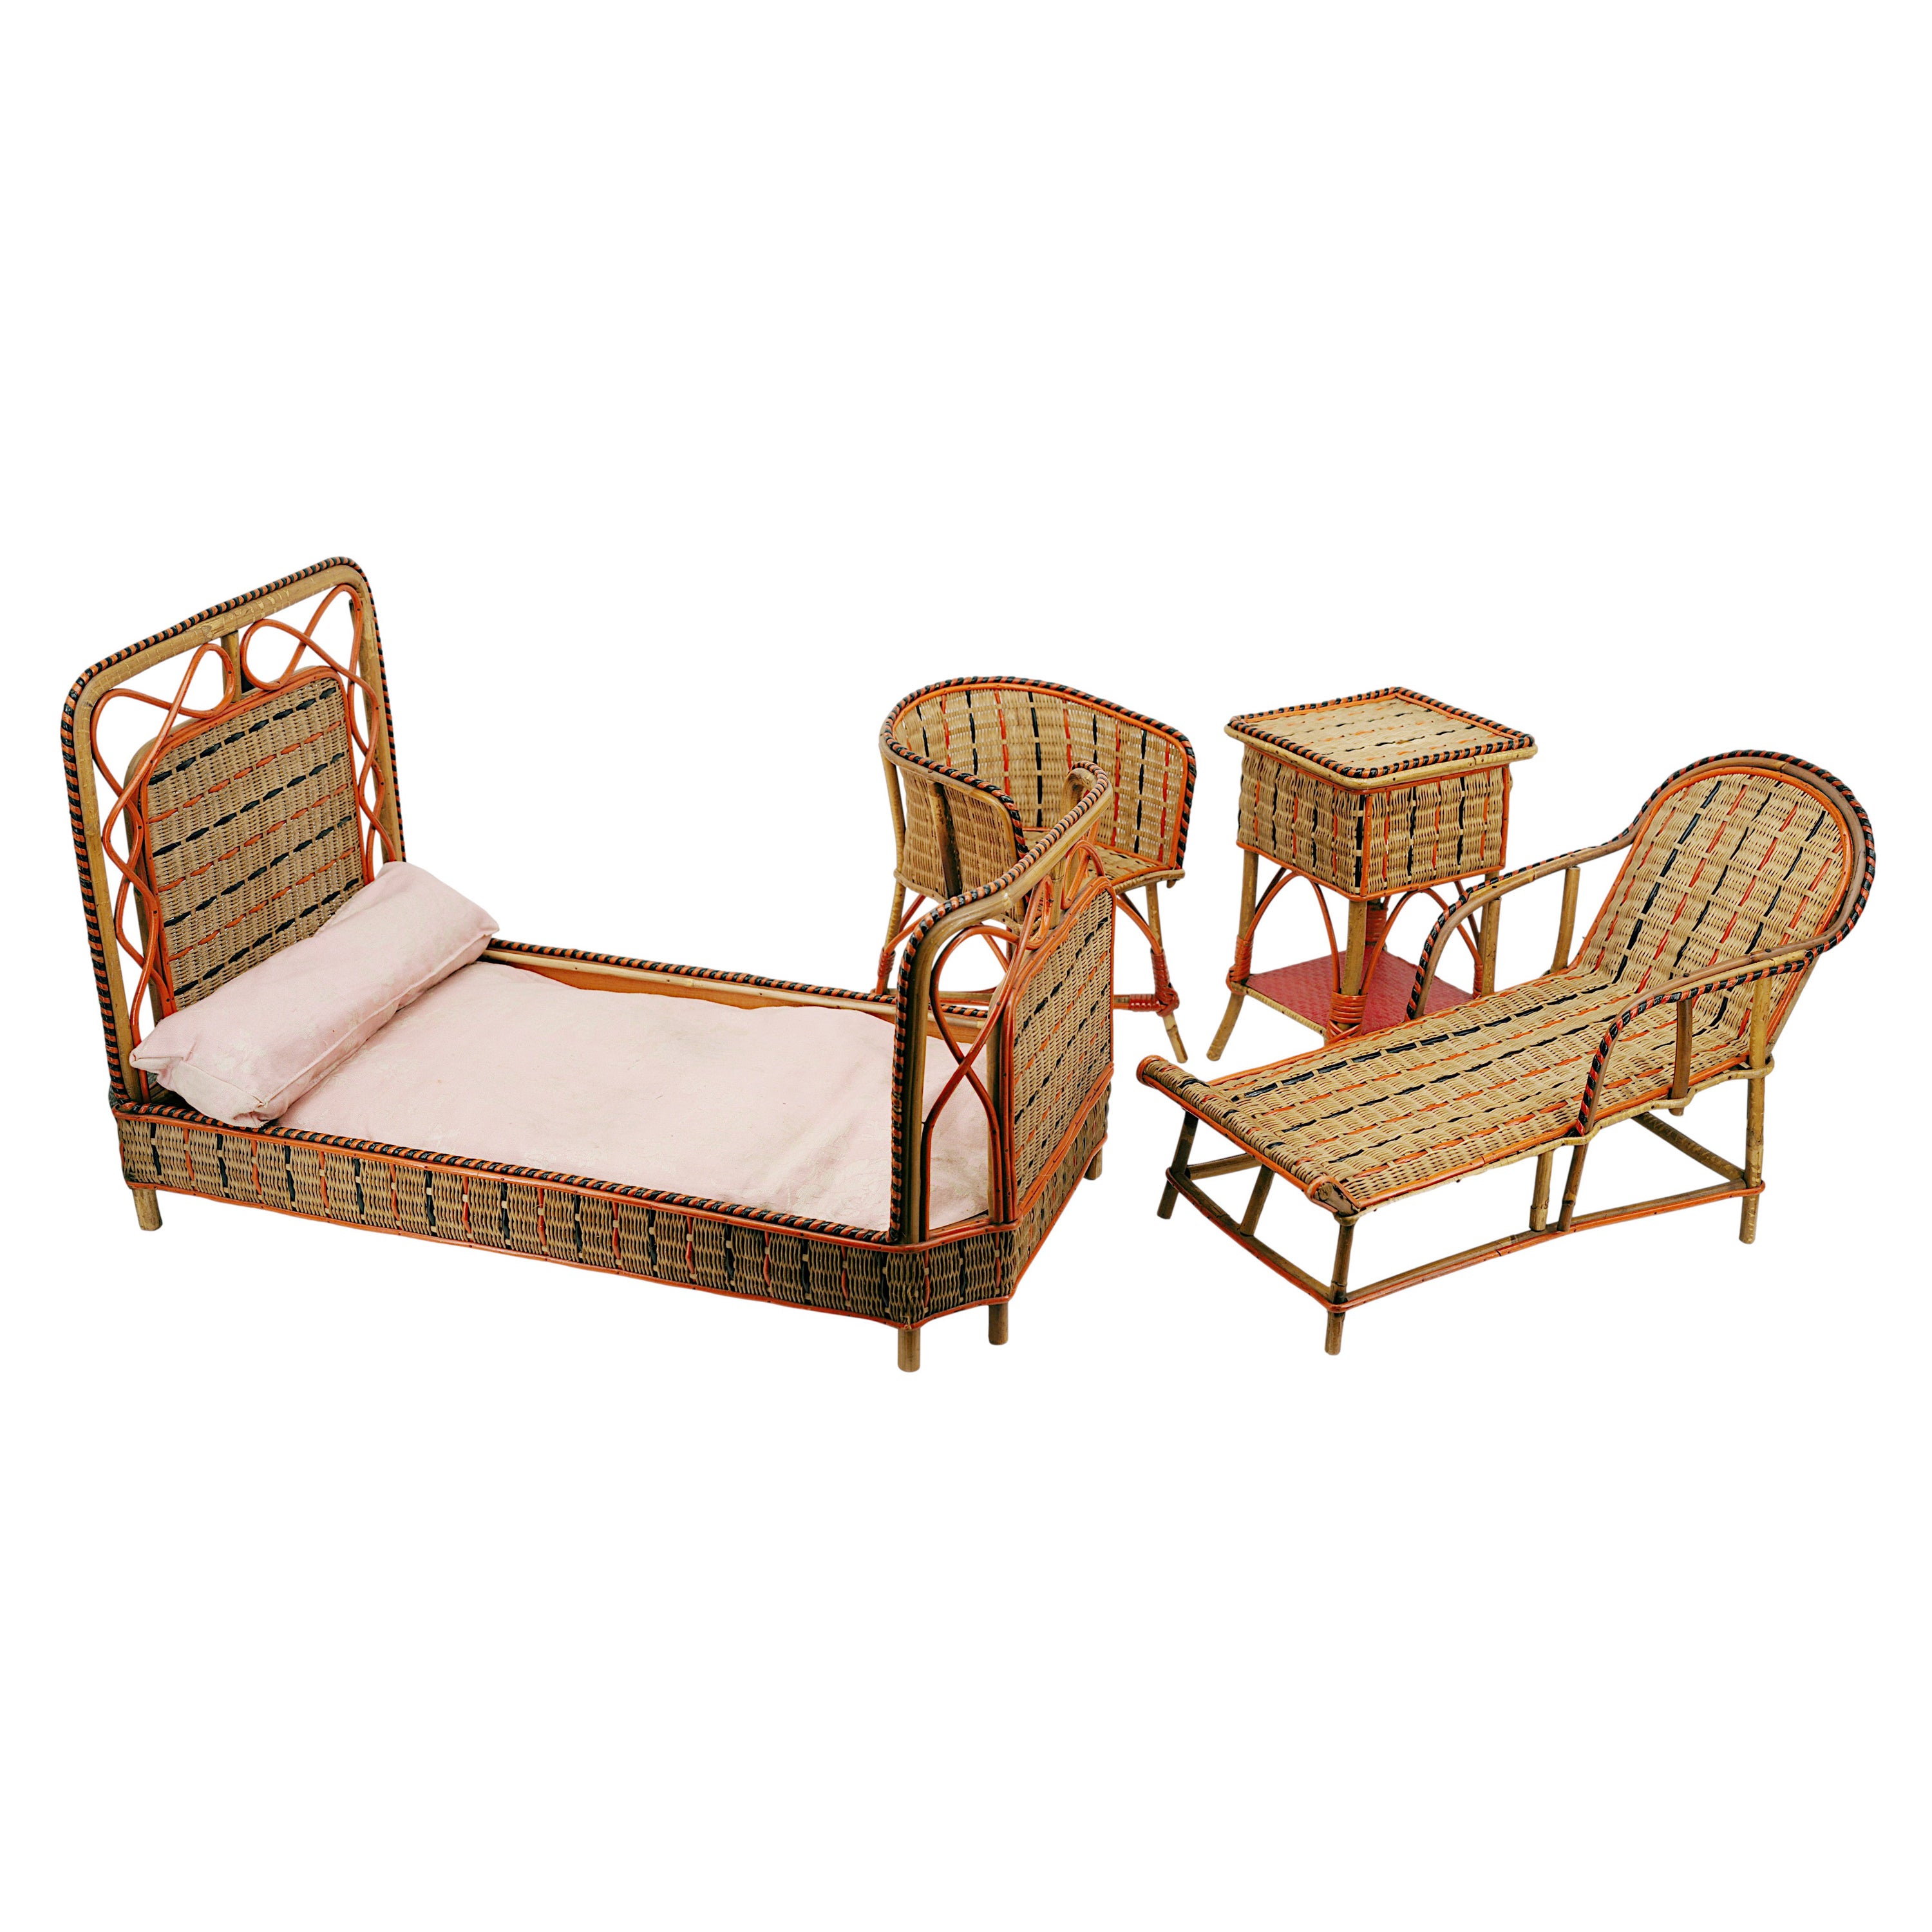 French Bamboo & Rattan Doll's Bedroom, Playhouse, ca.1900 For Sale